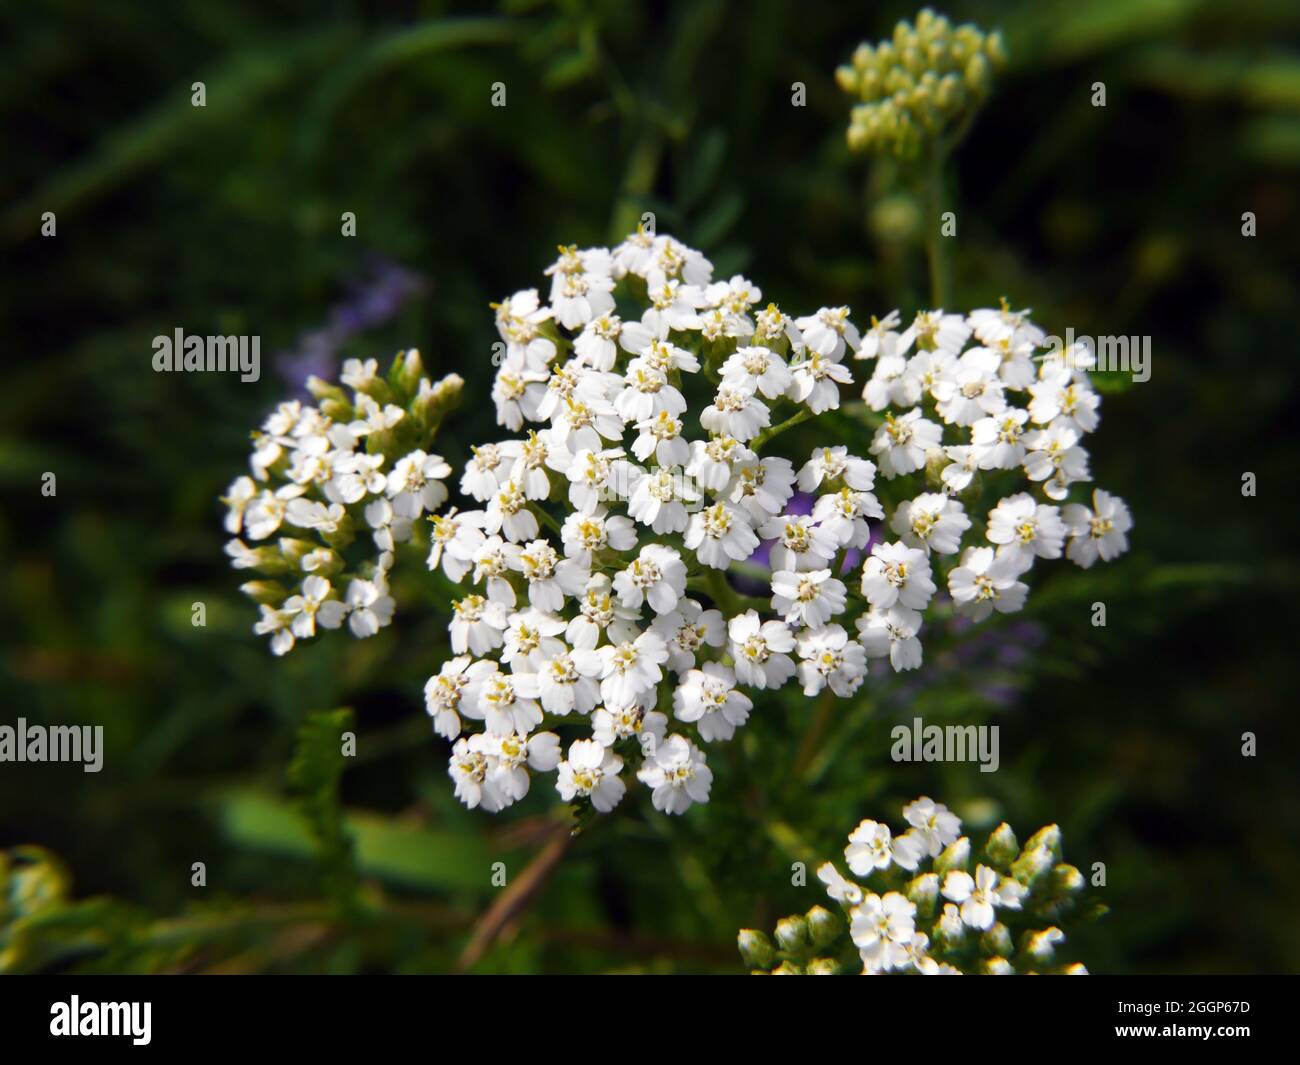 Close-up of the tiny white flowers on a common yarrow plant growing in a field. Stock Photo